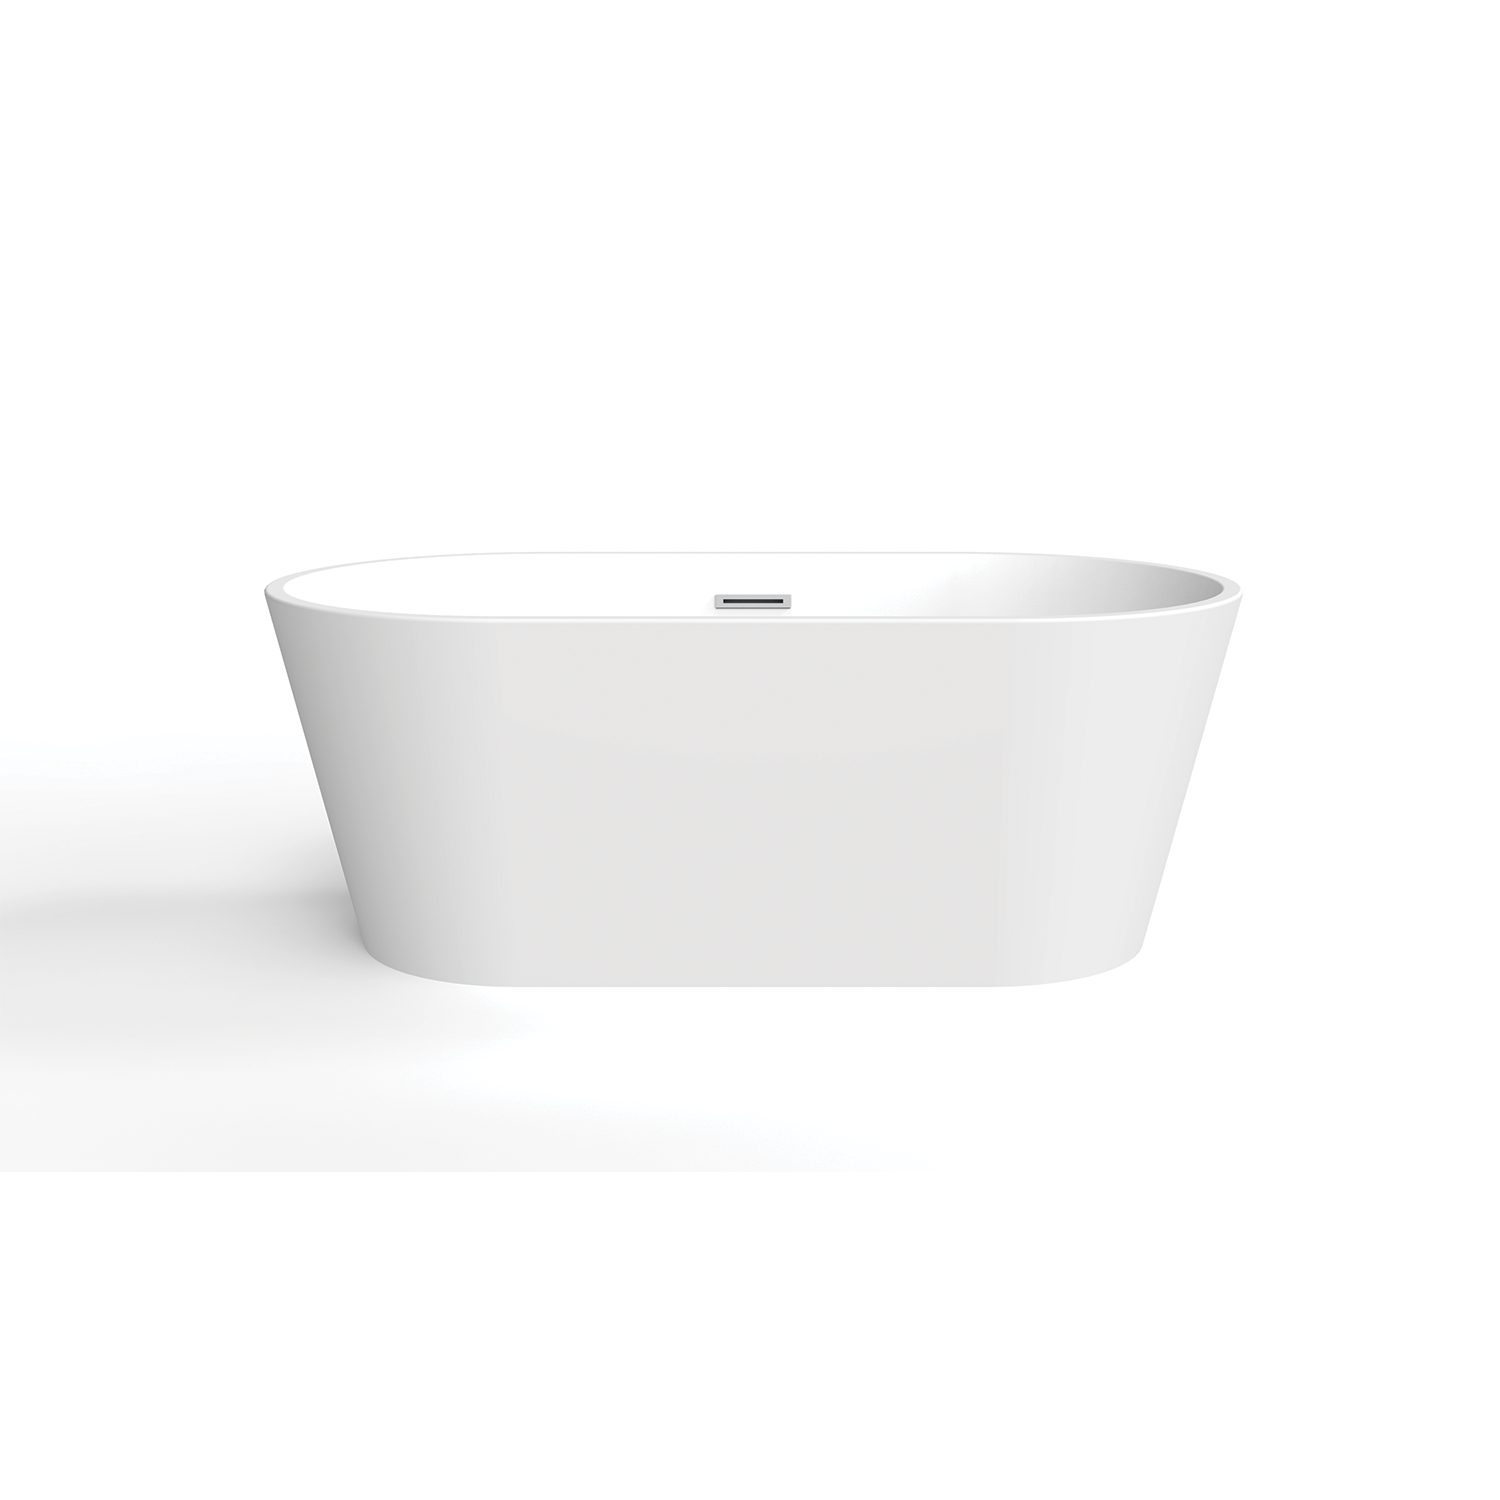 DAX Oval Freestanding Acrylic Bathtub - Glossy White Finished -59 inches (BT-11140)